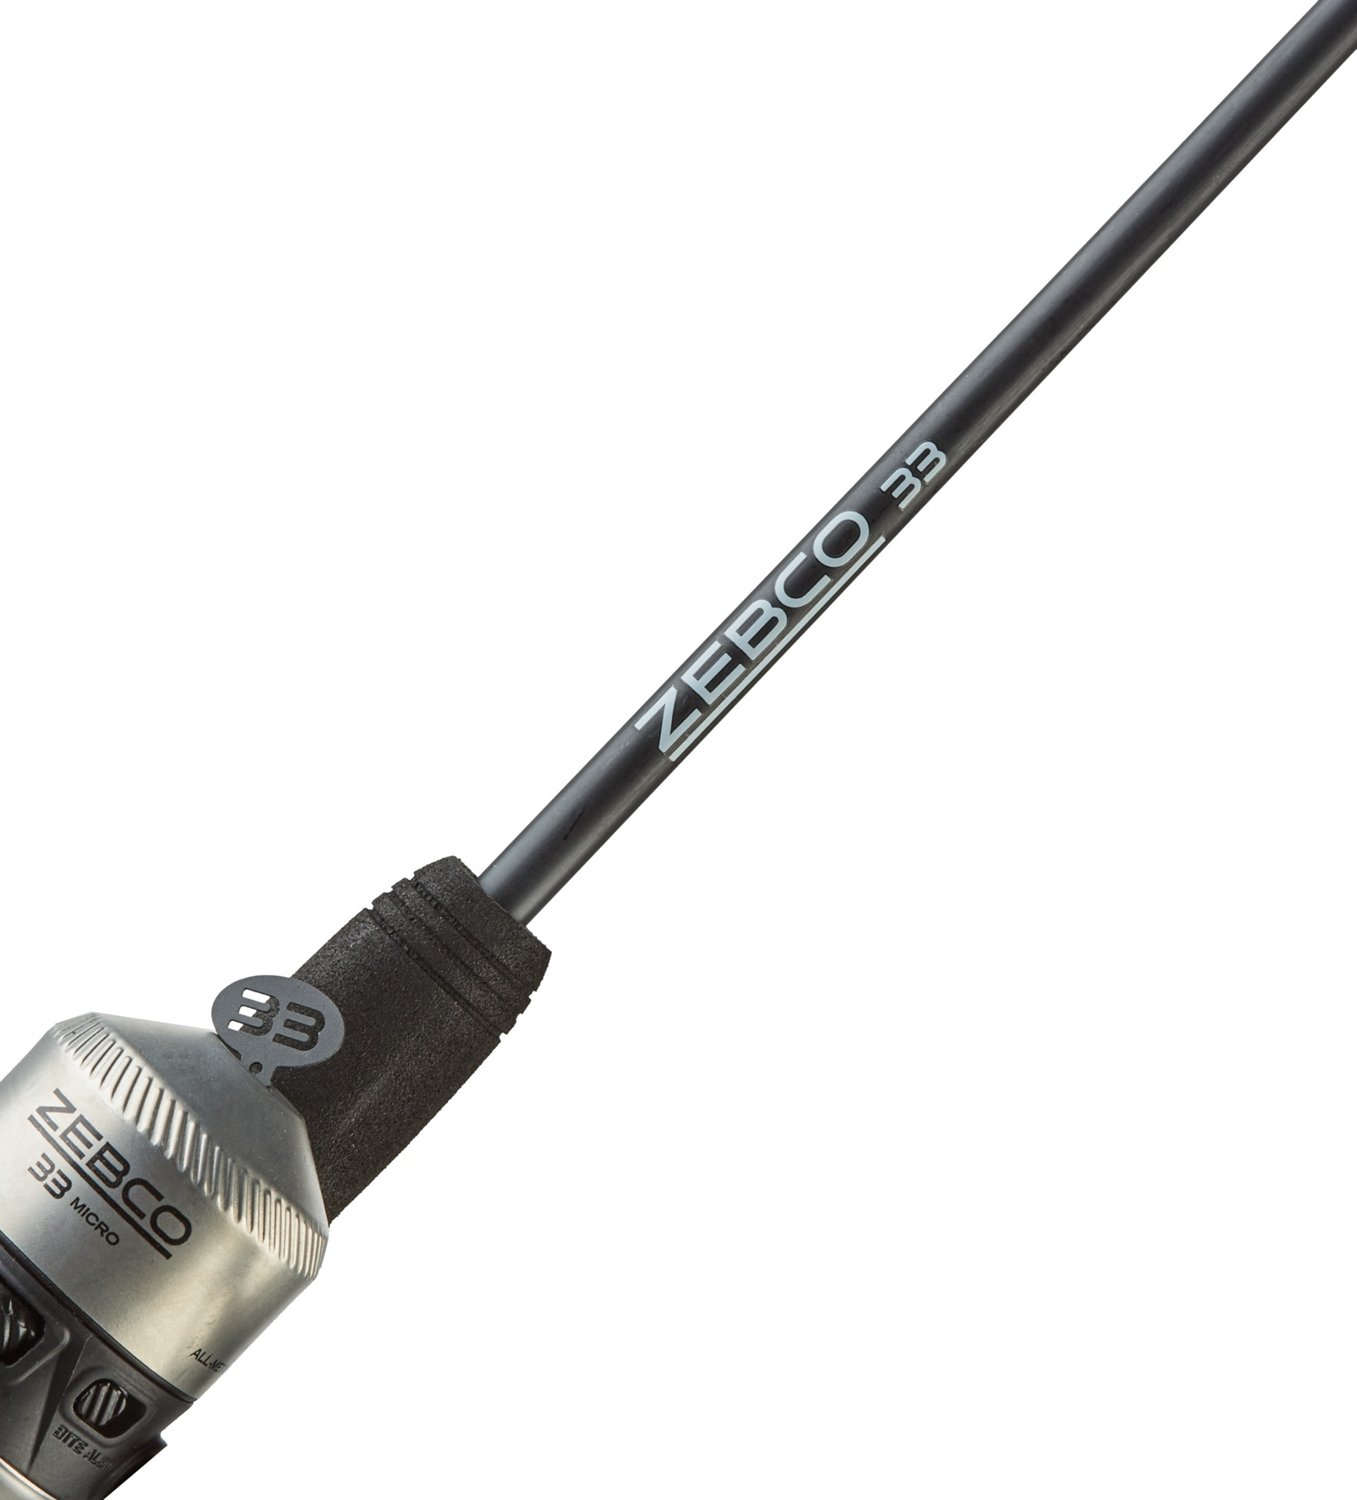 Zebco Micro 5 ft UL Freshwater Spincast Rod and Reel Combo